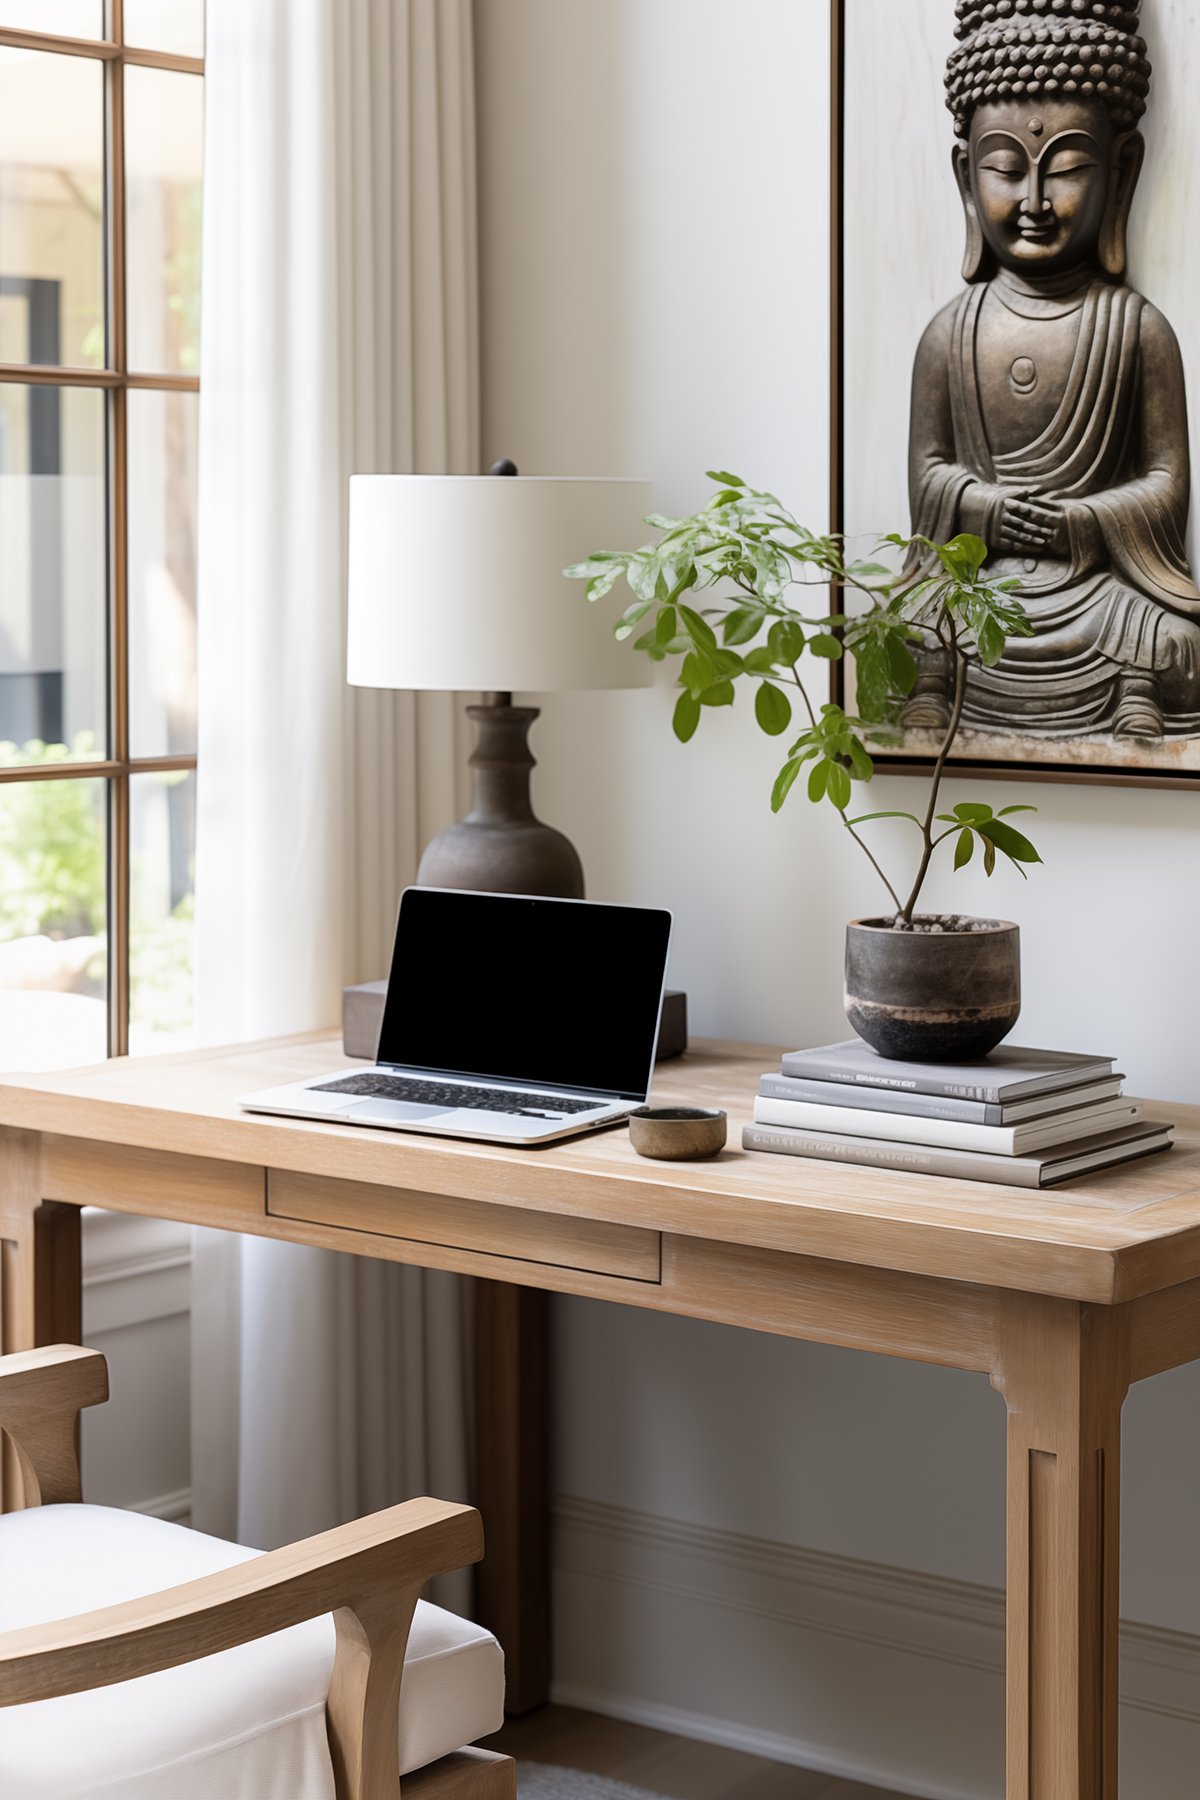 Zen-styled office with Buddha art, wooden desk, lamp, plant, and cream chair.